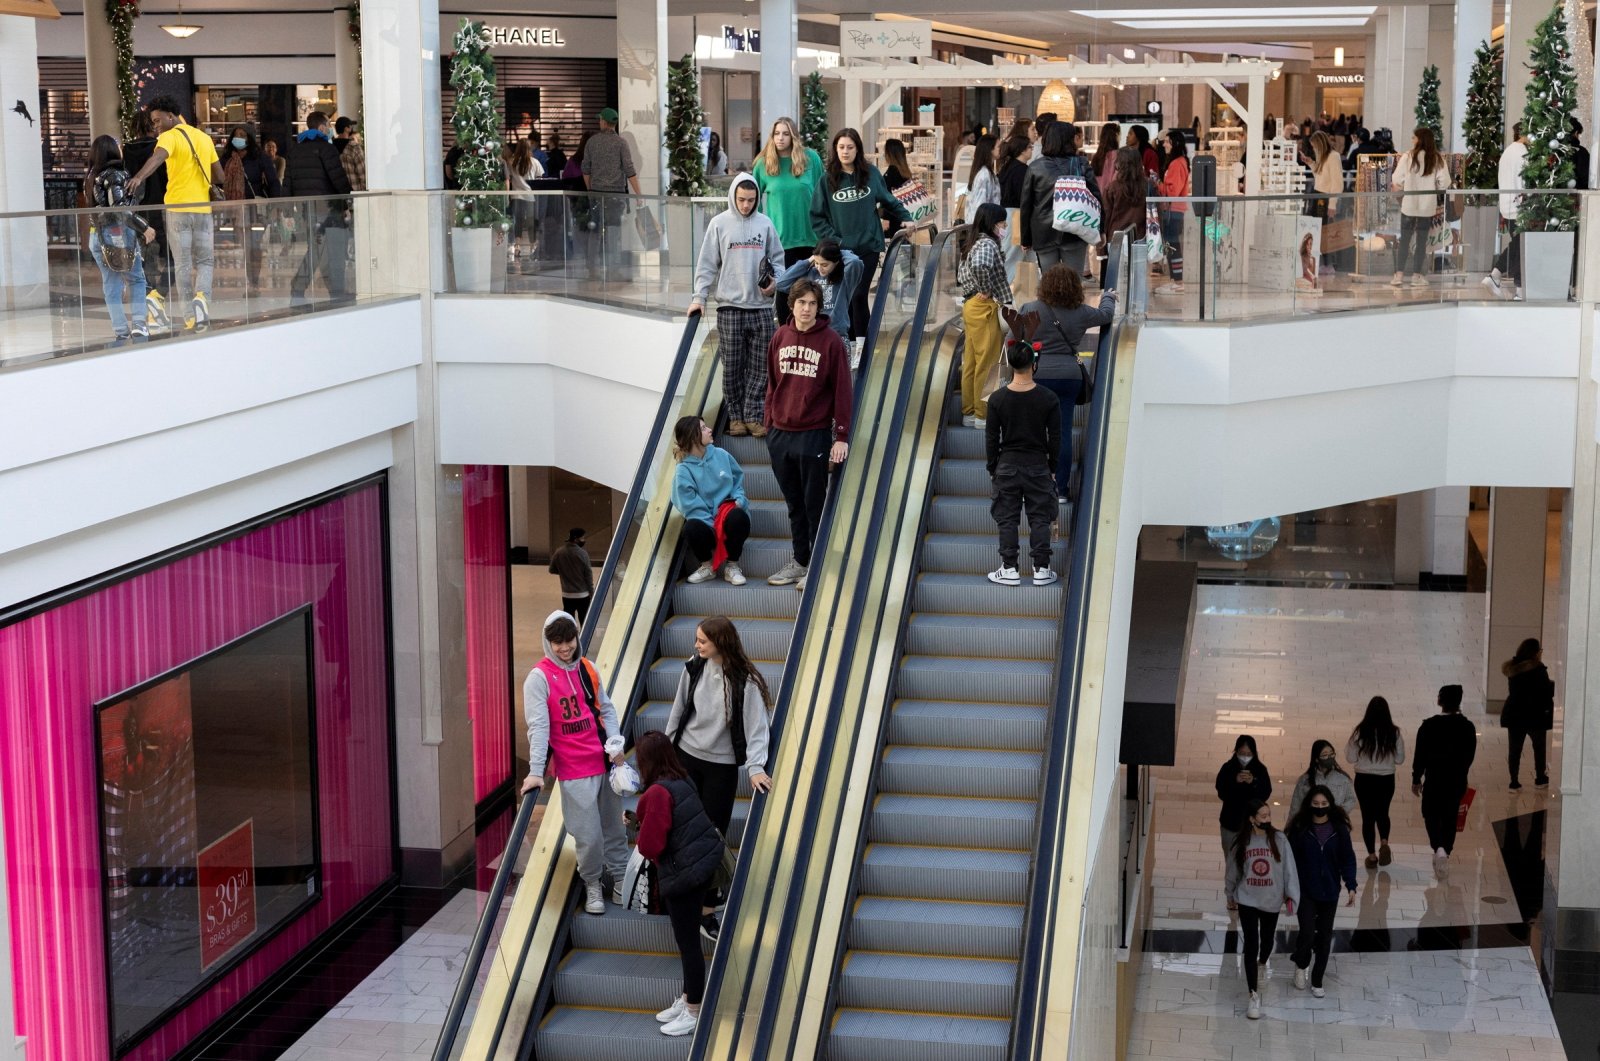 People ride on the elevator as shoppers show up early for the Black Friday sales at the King of Prussia shopping mall, King of Prussia, Pennsylvania, U.S. Nov. 26, 2021. (Reuters Photo)